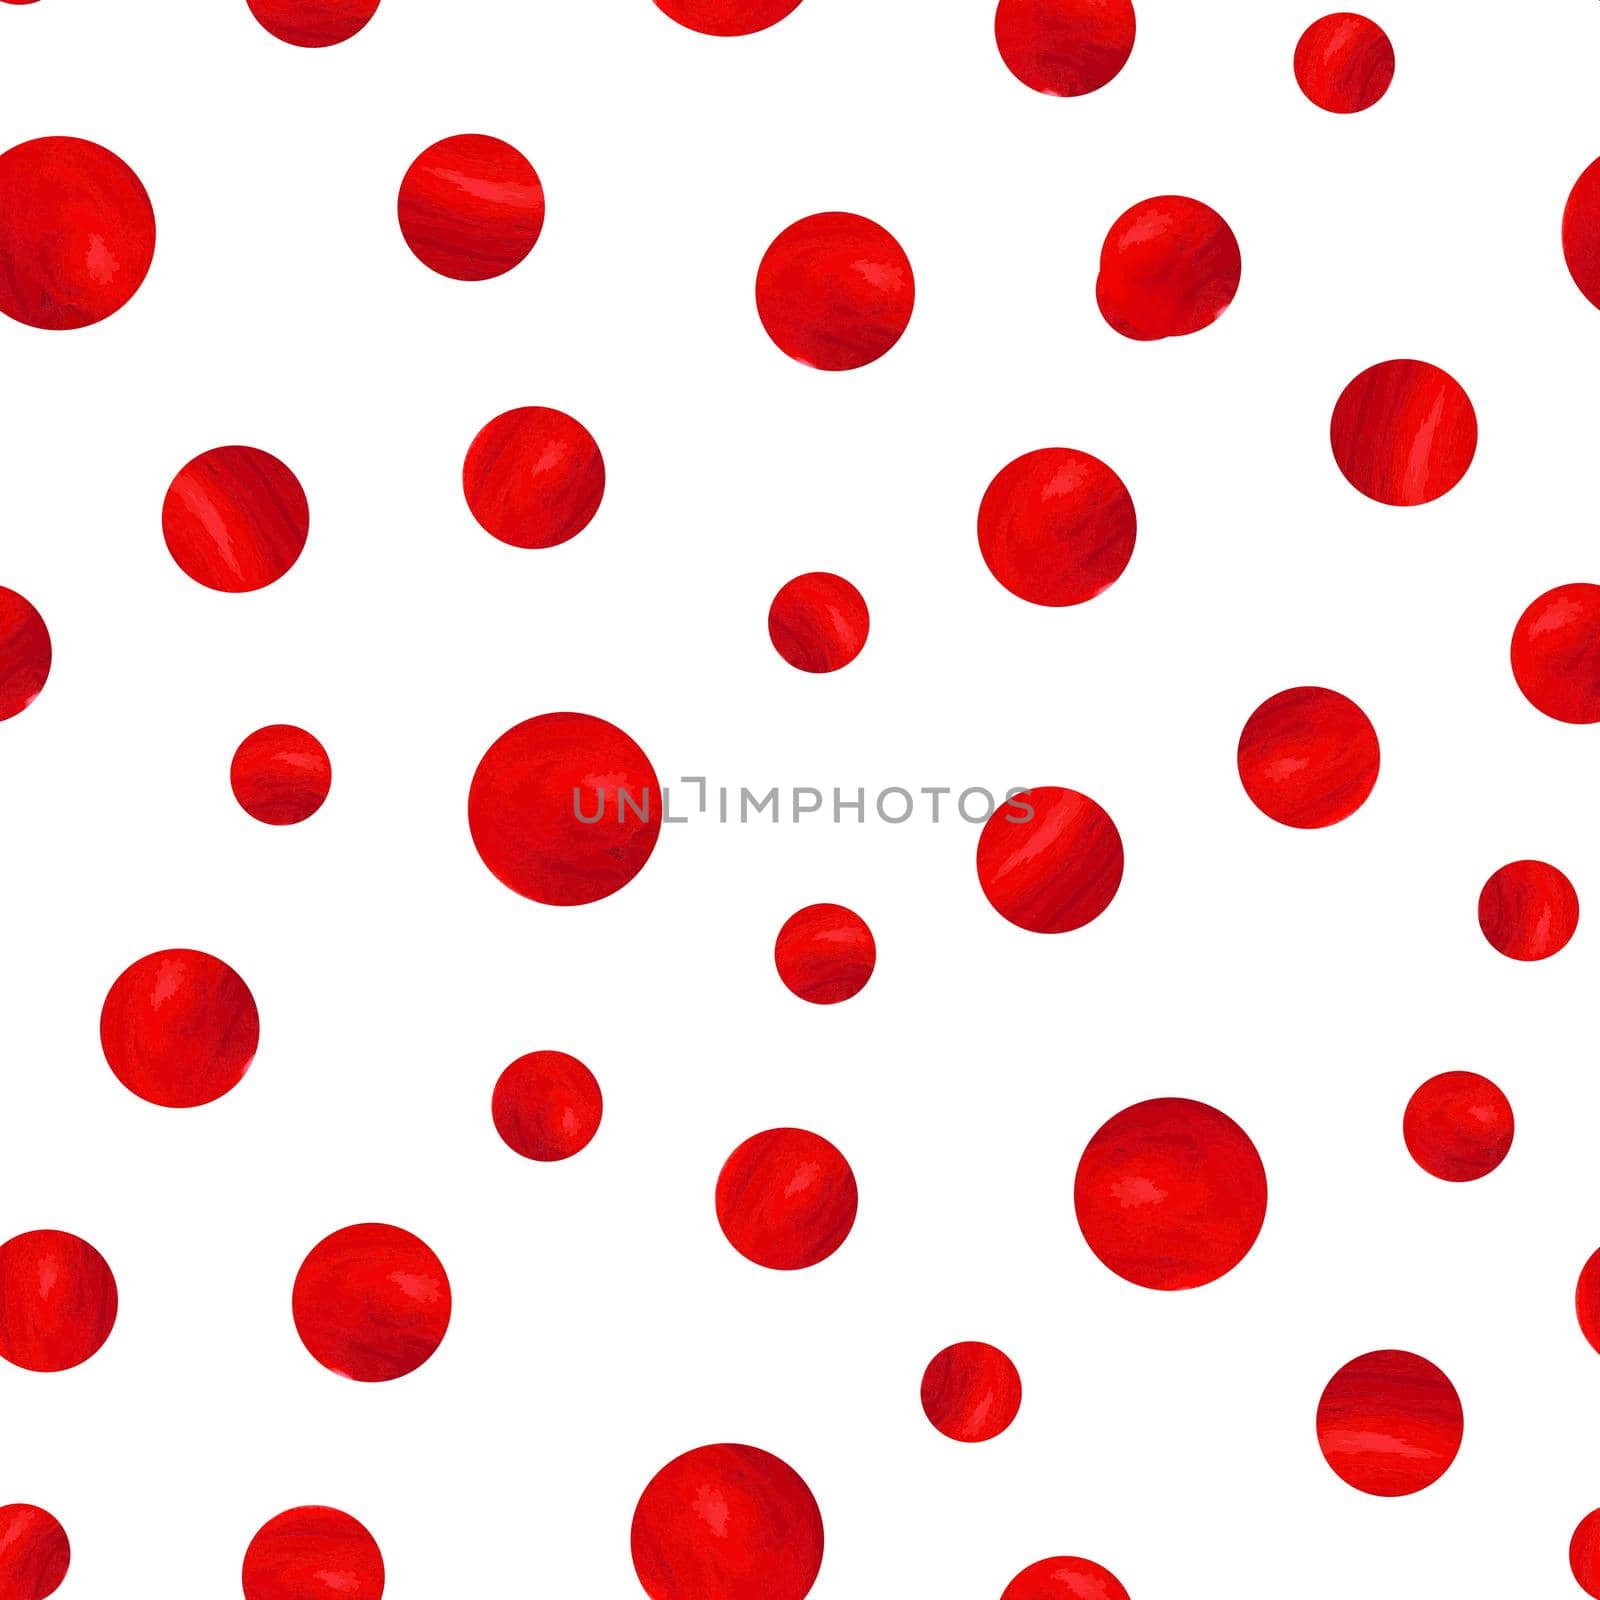 Abstract fashion grunge polka dots background. White seamless pattern with red textured circles. Template design for invitation, poster, card, flyer, banner, textile, fabric. Halftone card